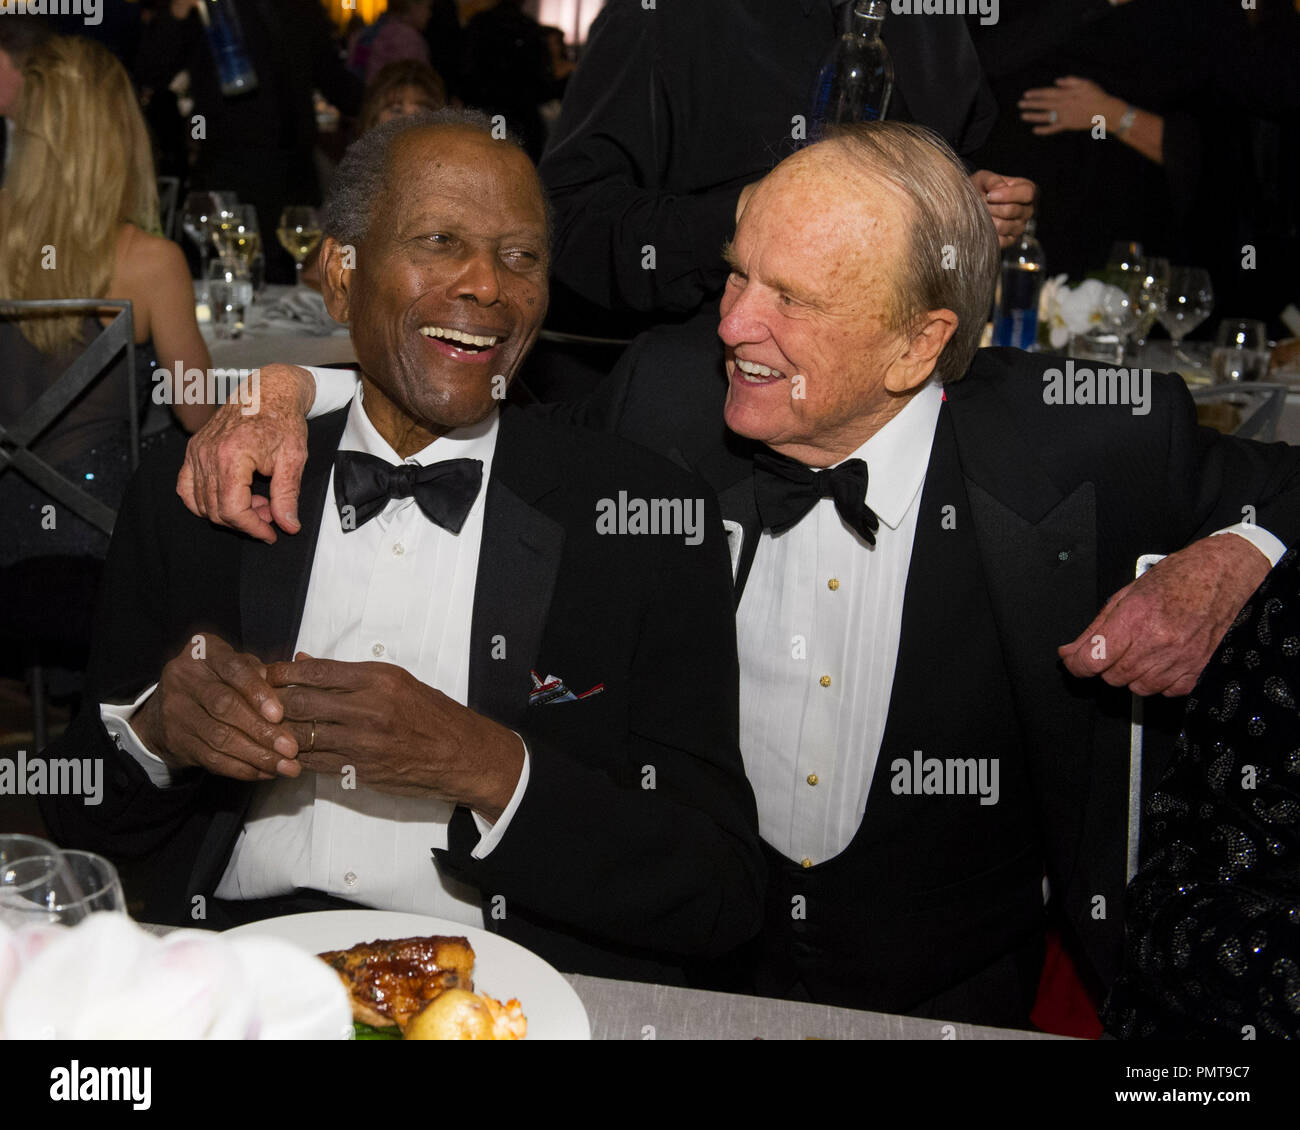 Oscar®-winning actor Sidney Poitier (left) and Honorary Award recipient George Stevens Jr. attend the 2012 Governors Awards at The Ray Dolby Ballroom at Hollywood & Highland Center® in Hollywood, CA, Saturday, December 1.  File Reference # 31744 045  For Editorial Use Only -  All Rights Reserved Stock Photo